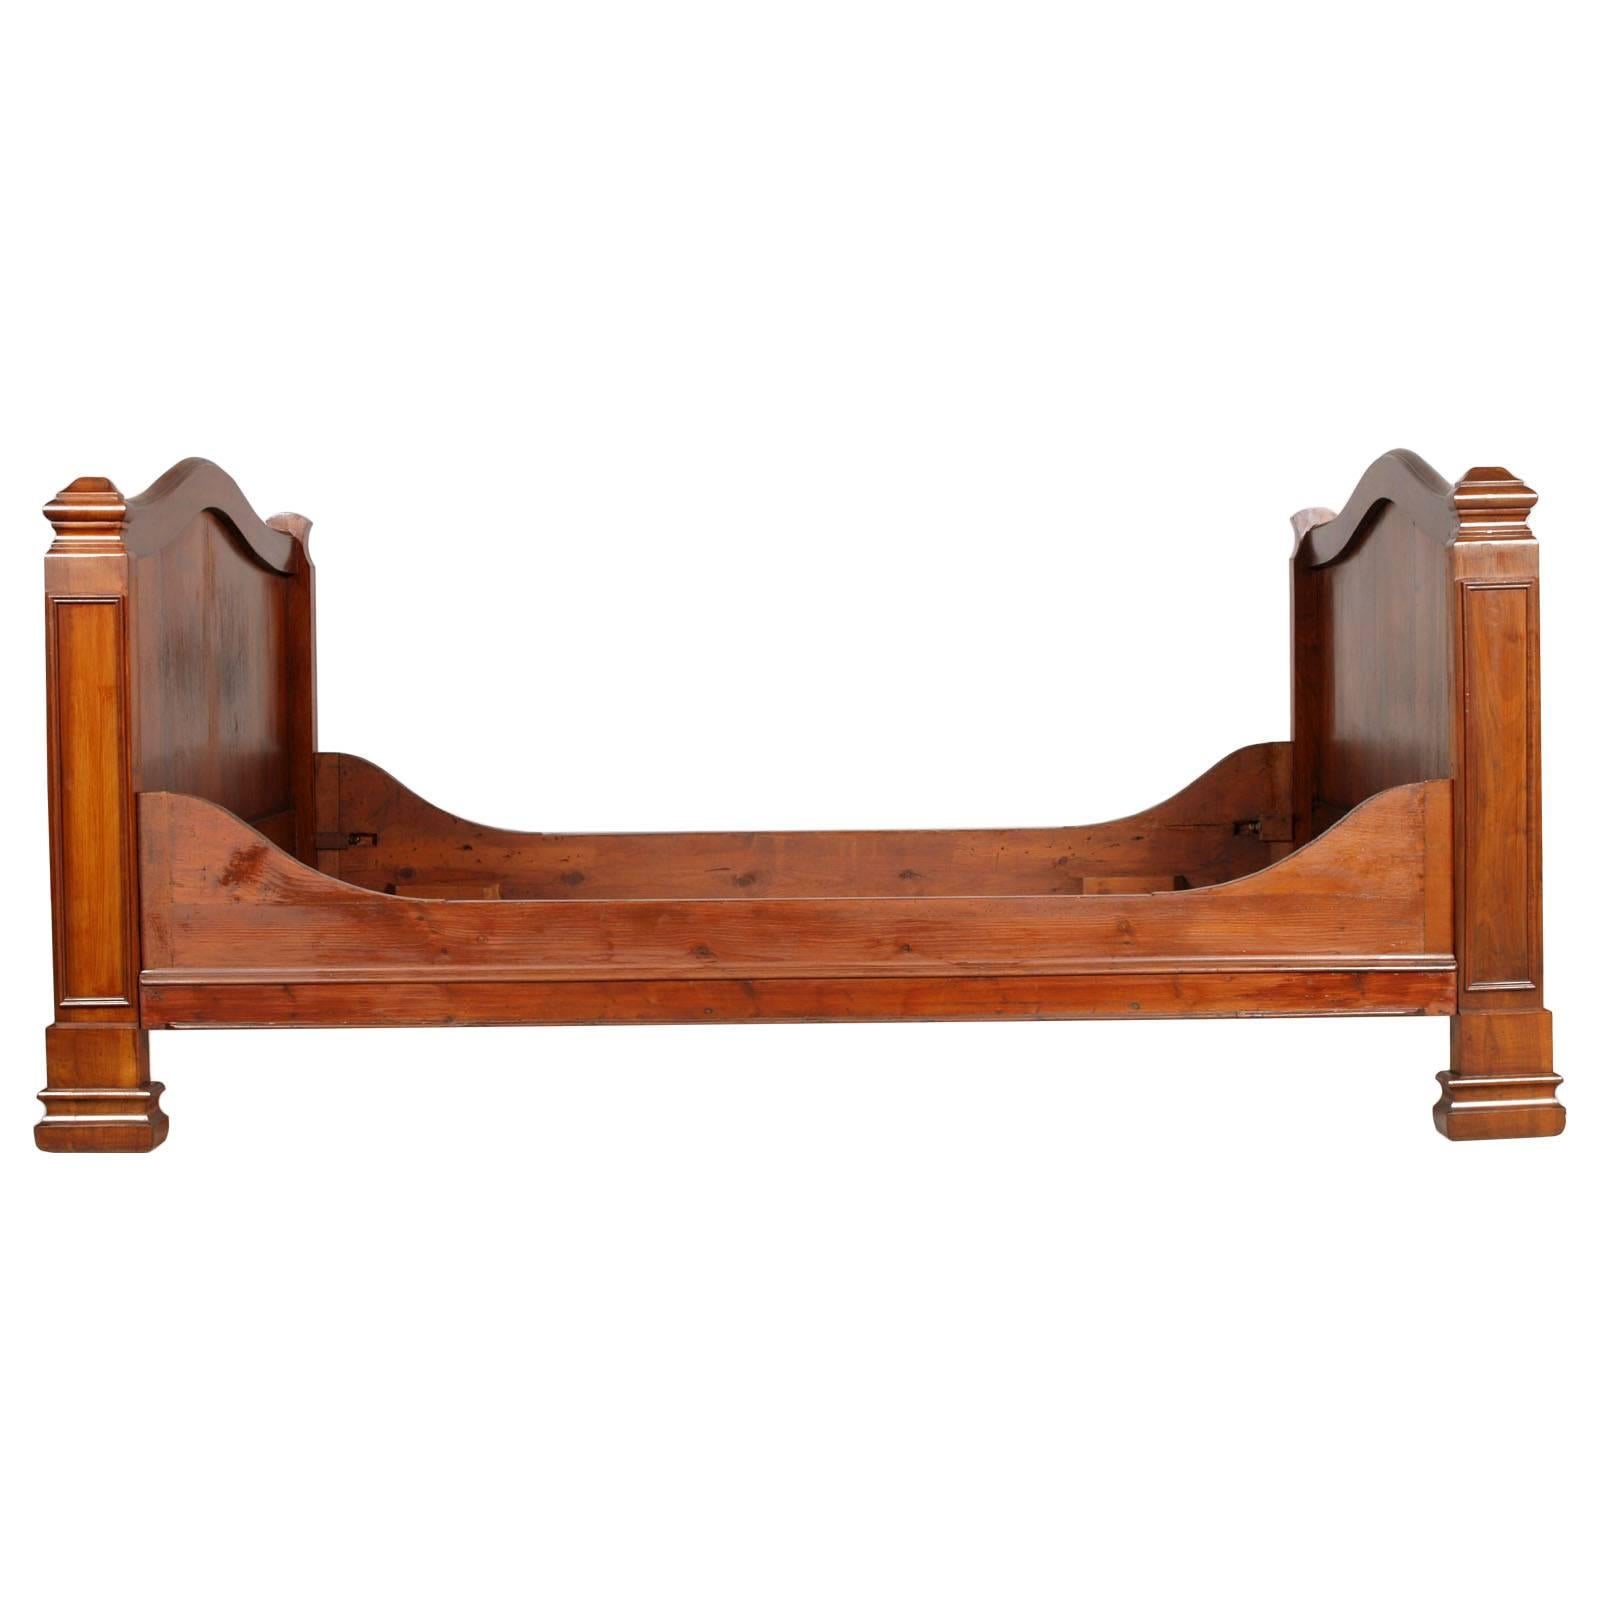 19th Century French Provencal Daybed Massive Walnut Restored and Polished to Wax 2